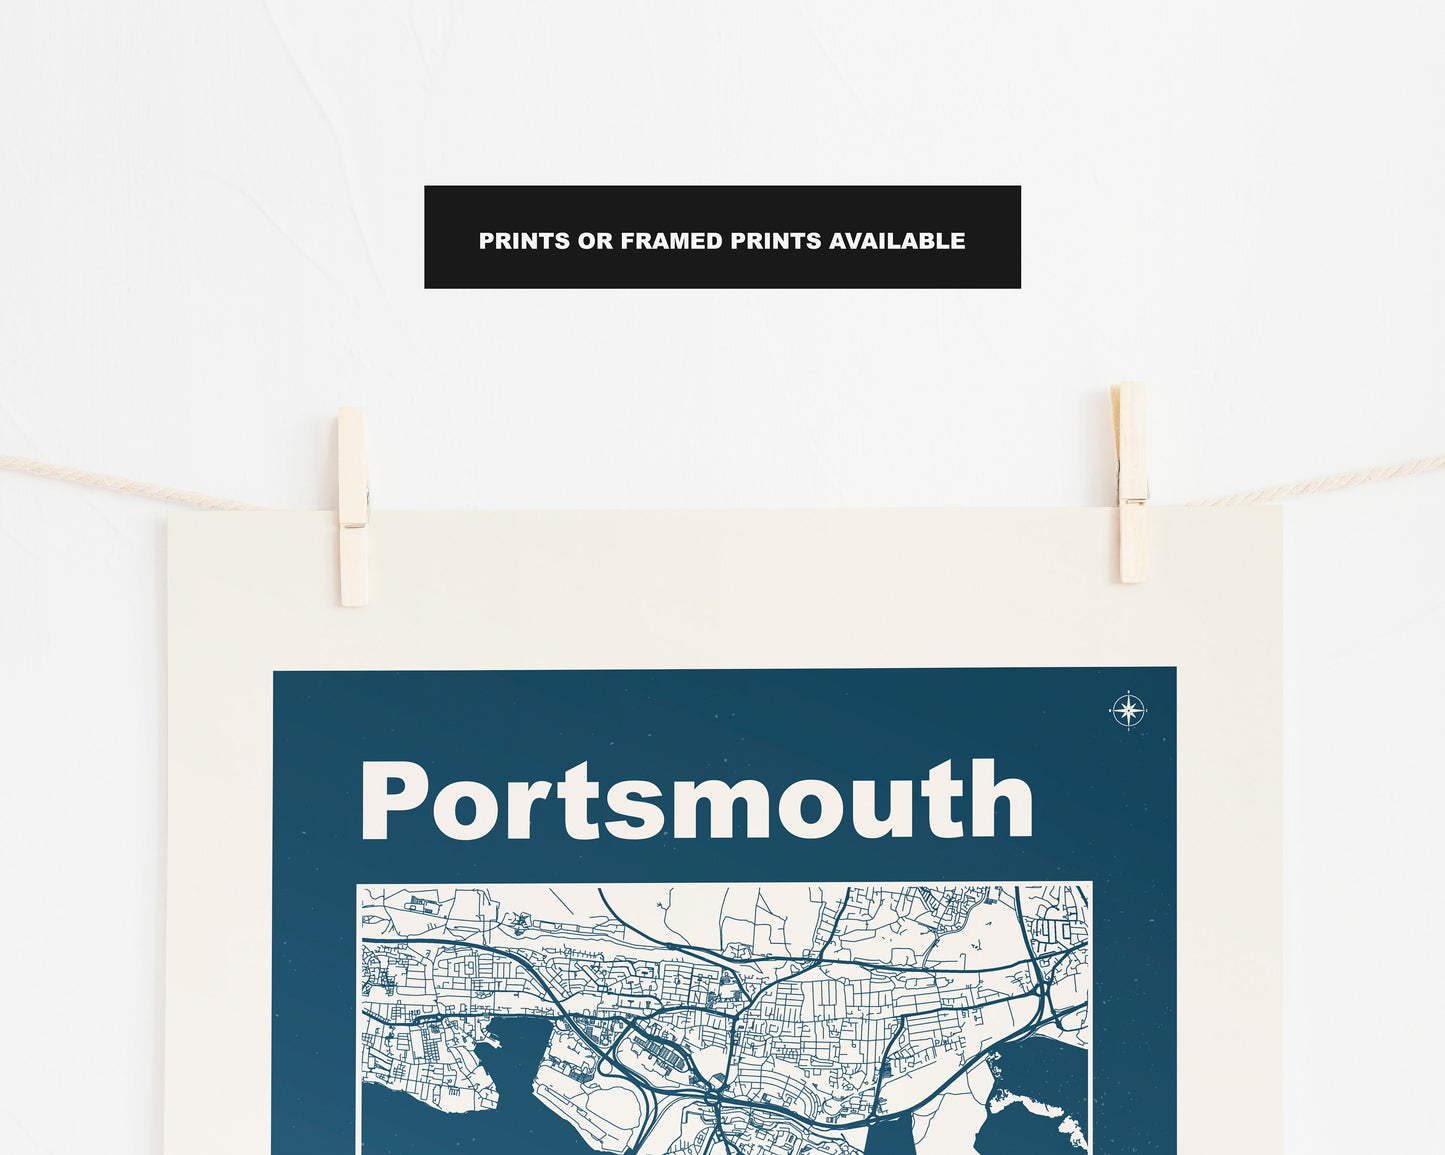 Portsmouth Print - Map Print - Mid Century Modern  - Retro - Vintage - Contemporary - Portsmouth Print - Map - Map Poster - Gift - Hampshire